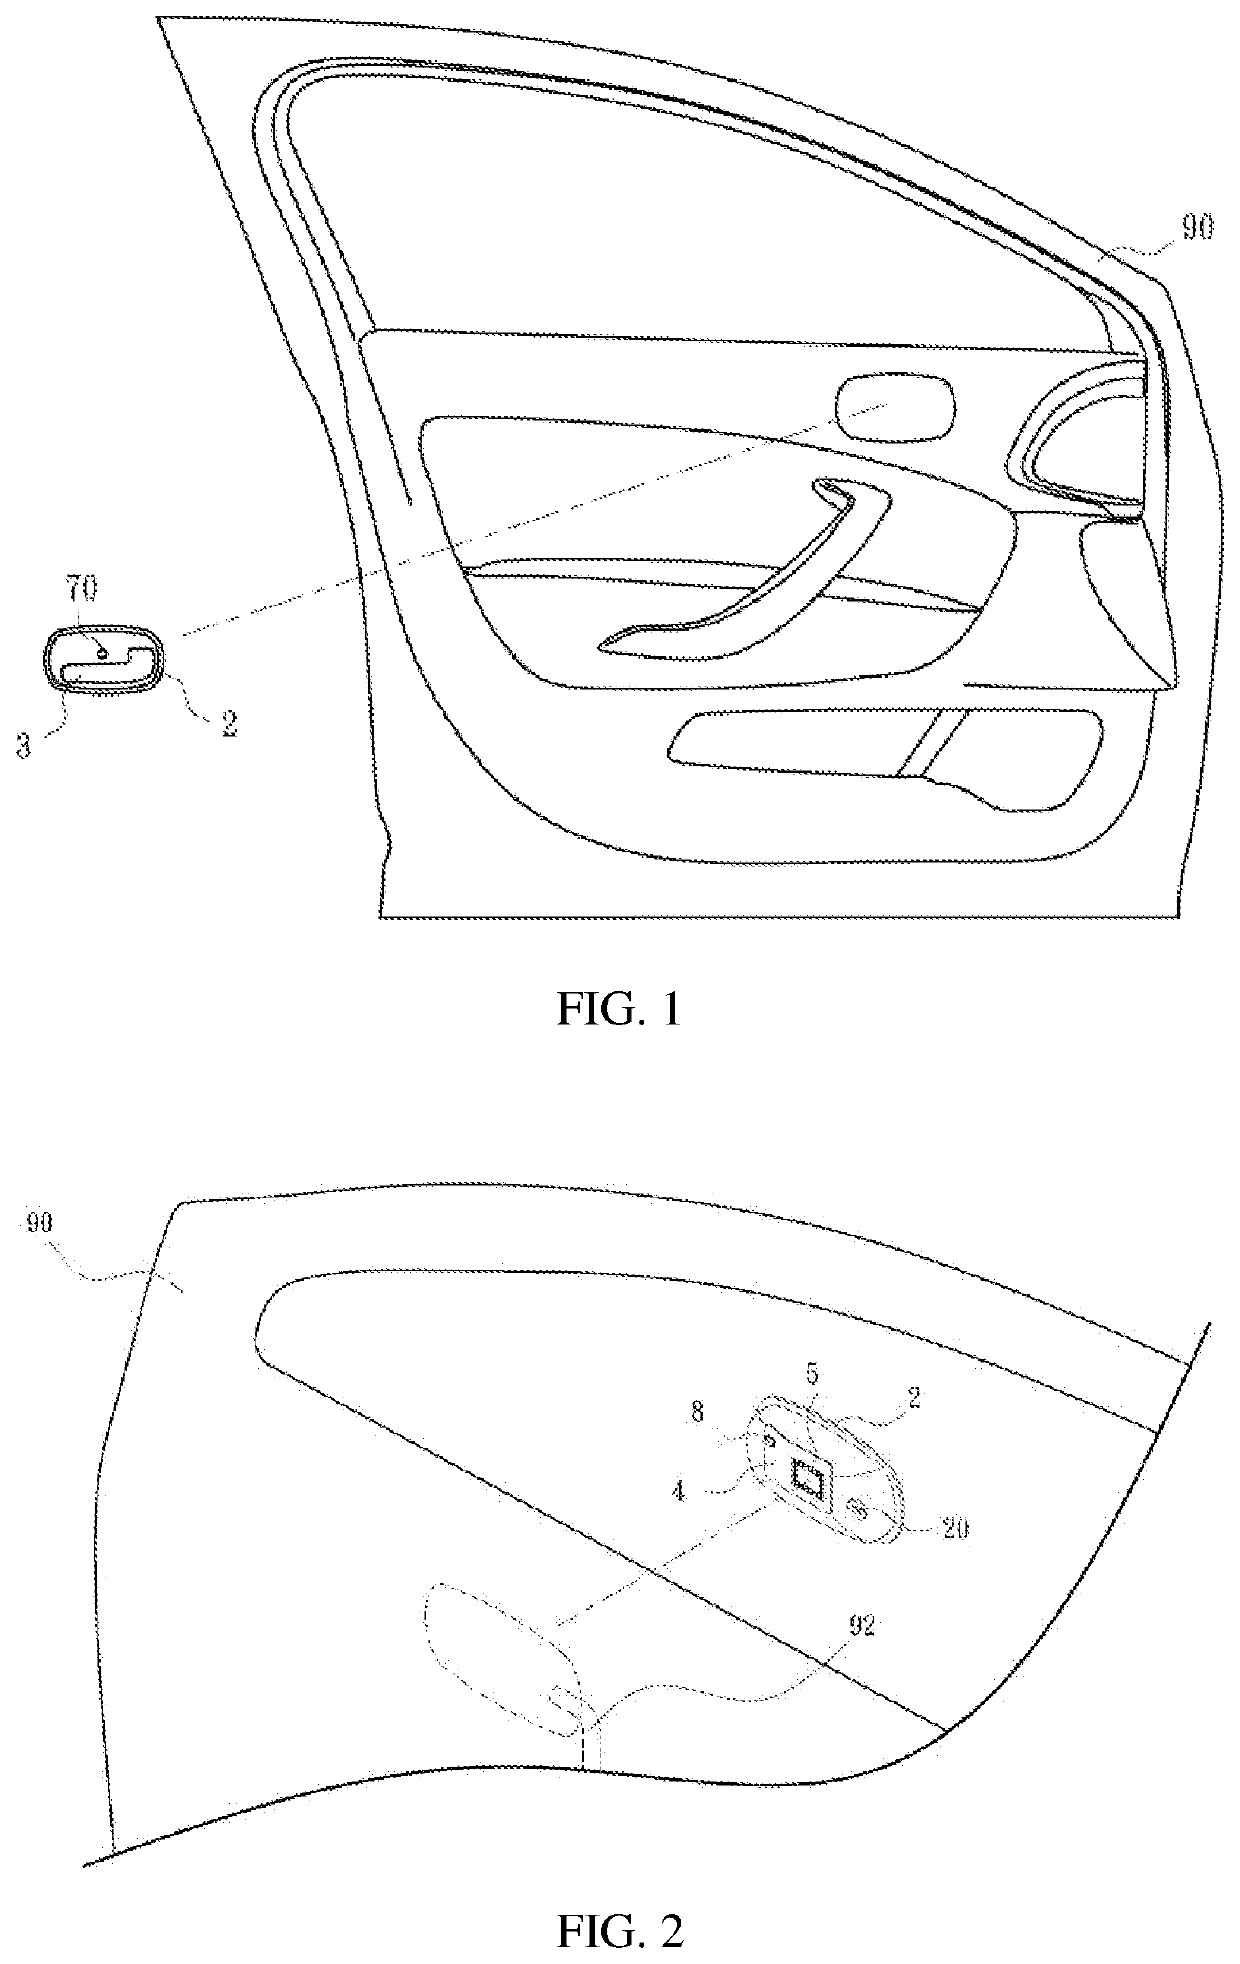 A capacitive sensing car-door pre-opening warning device based on a flexible printed circuit